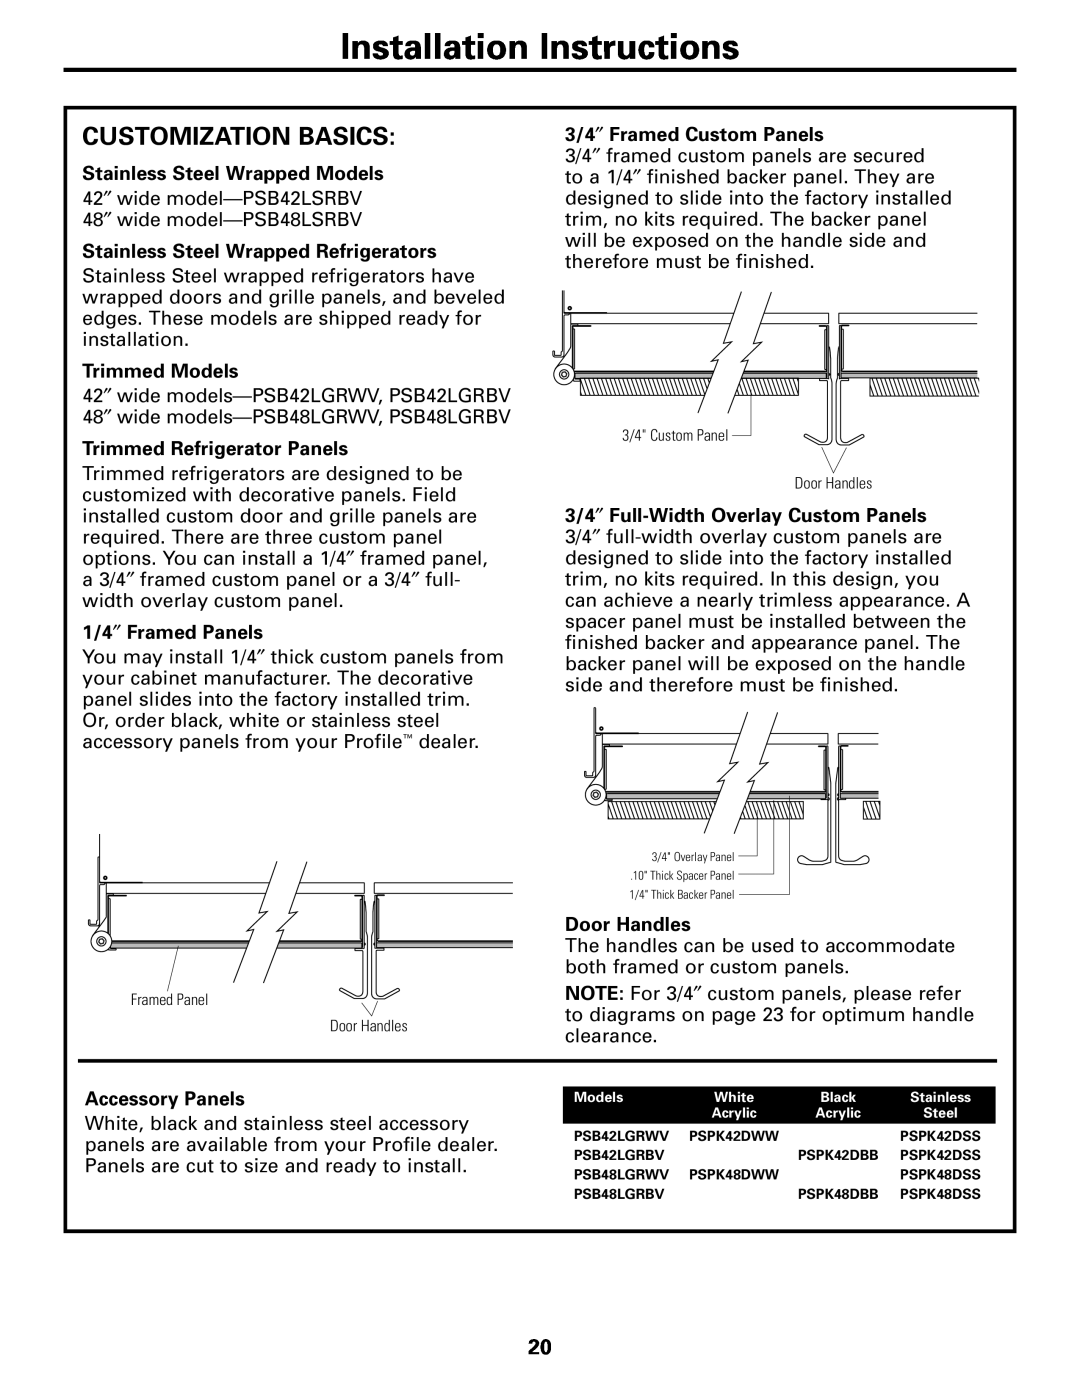 GE 42 Customization Basics, Installation Instructions, Stainless Steel Wrapped Models, Trimmed Models, 1/4″ Framed Panels 